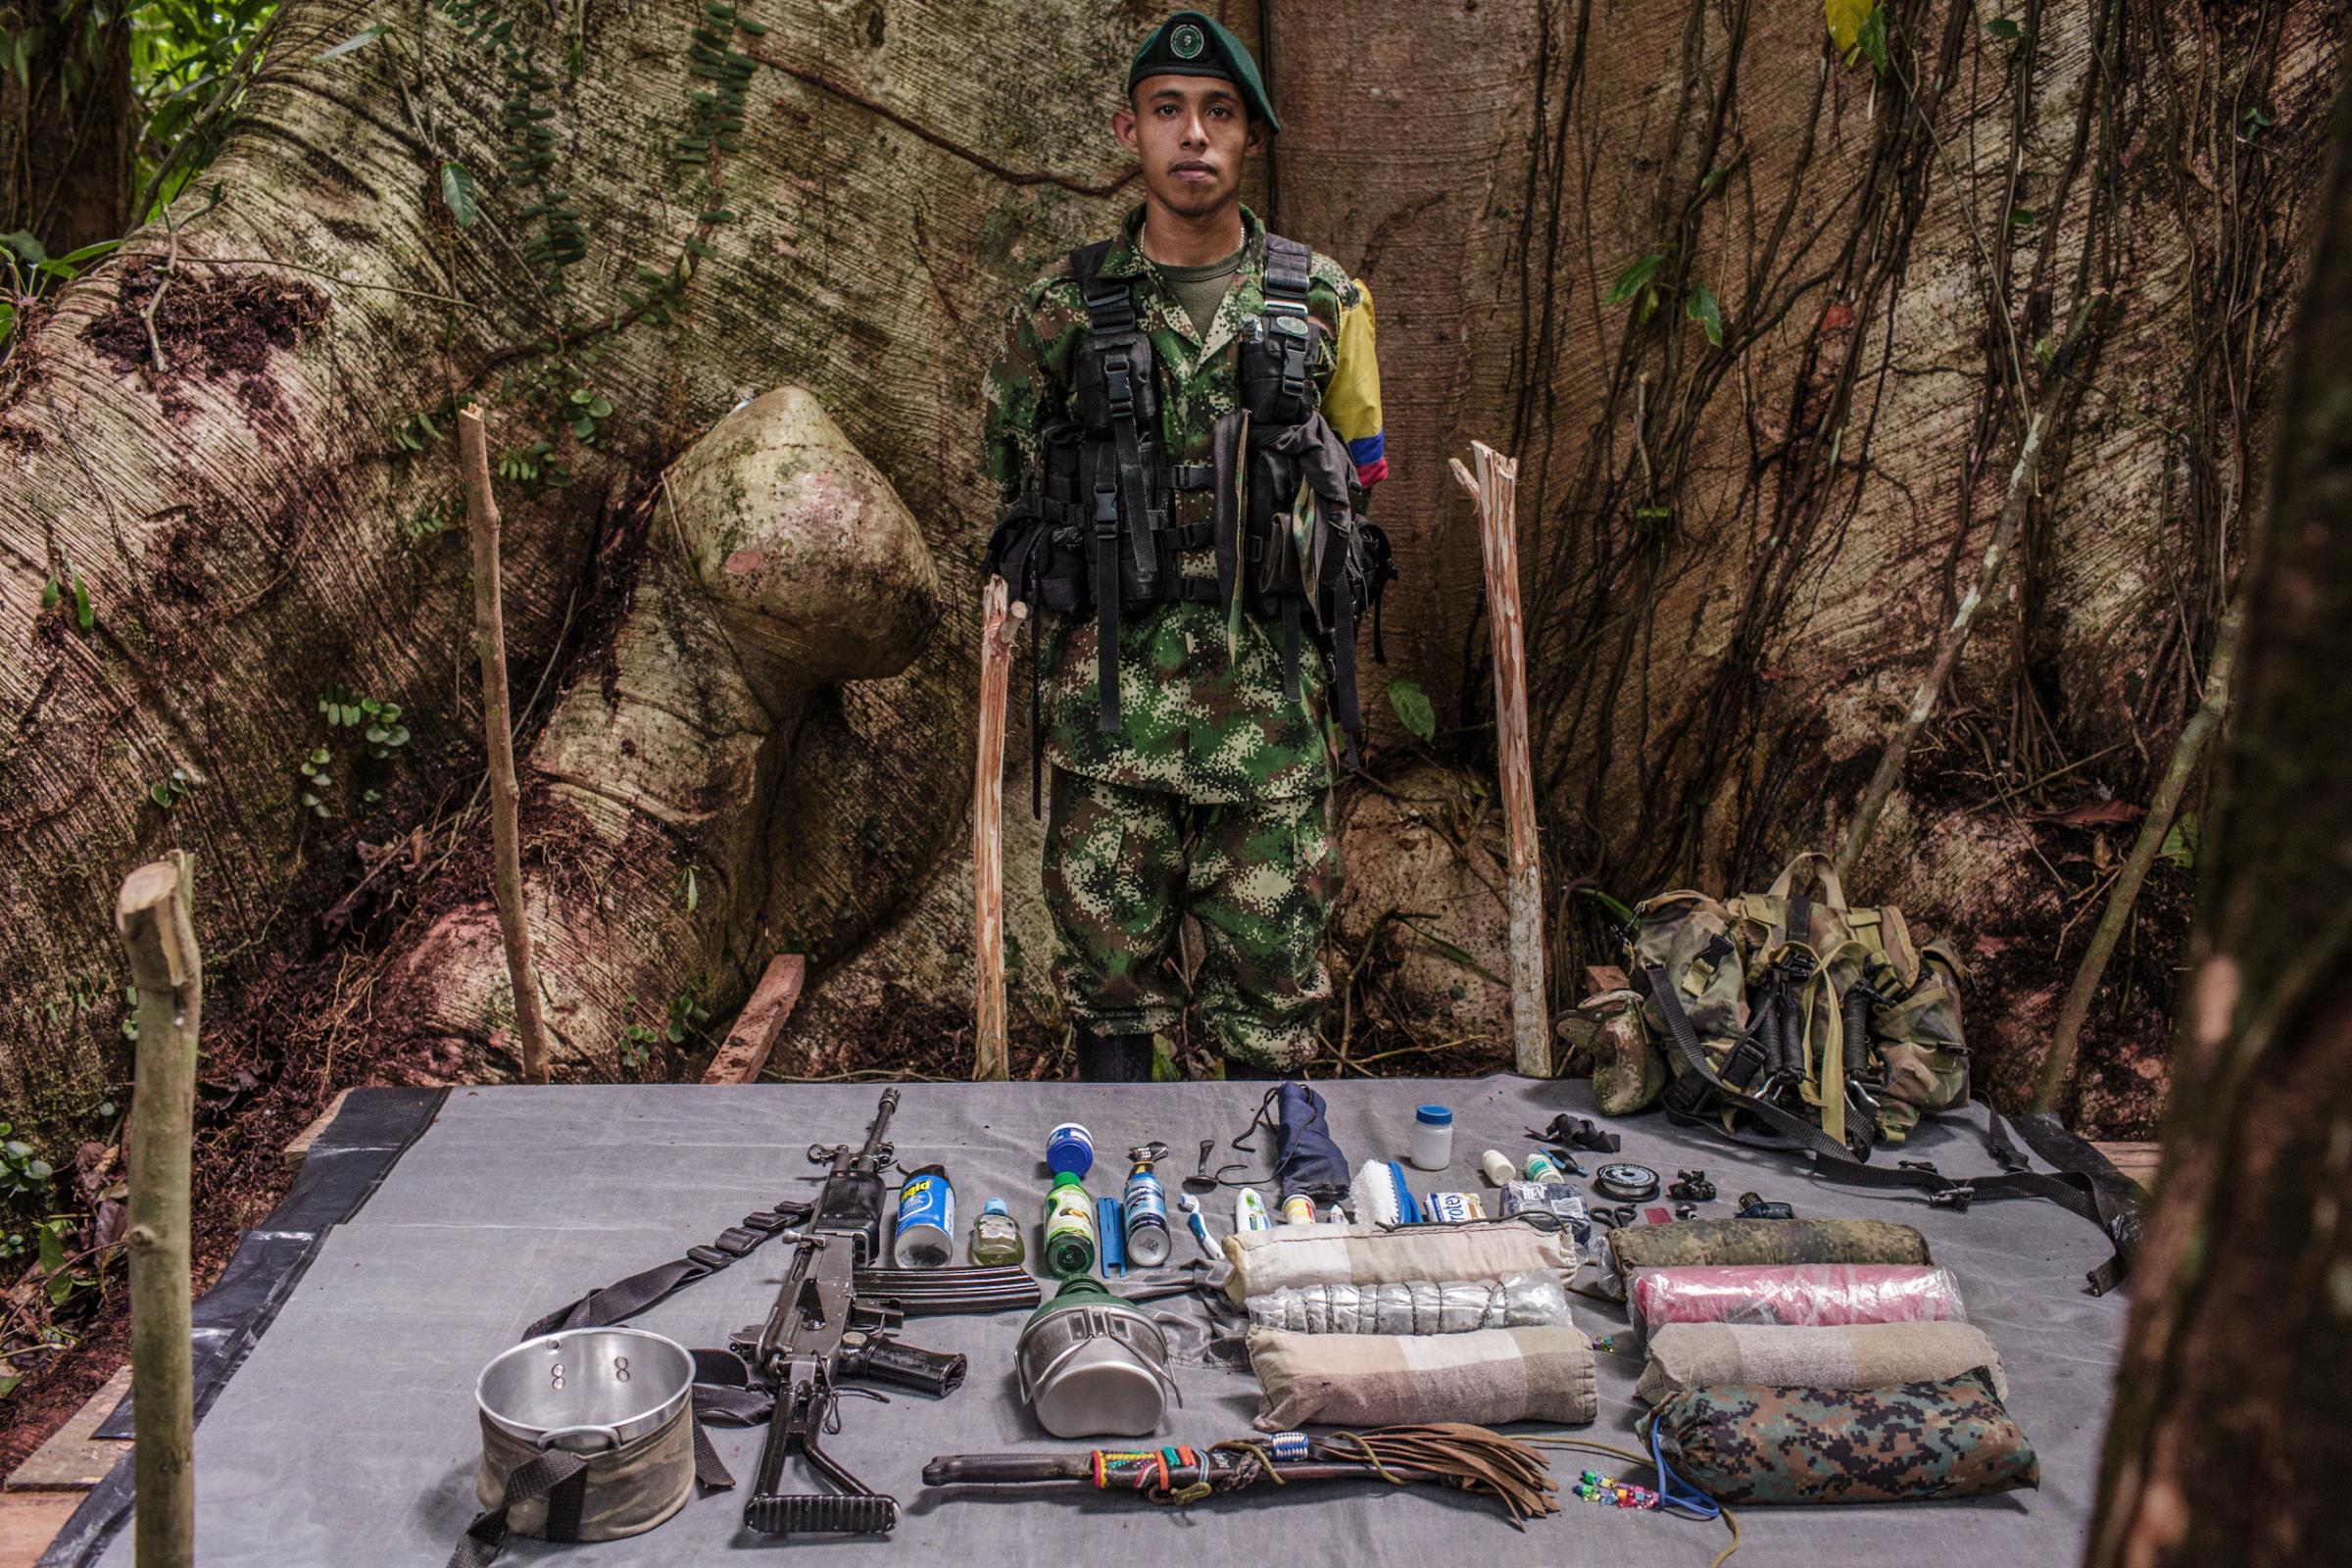 Andres, 24-years old, has been with FARC for 8 years. He has expert knowledge of the shallow rivers in the jungle, important terrain for moving troops.